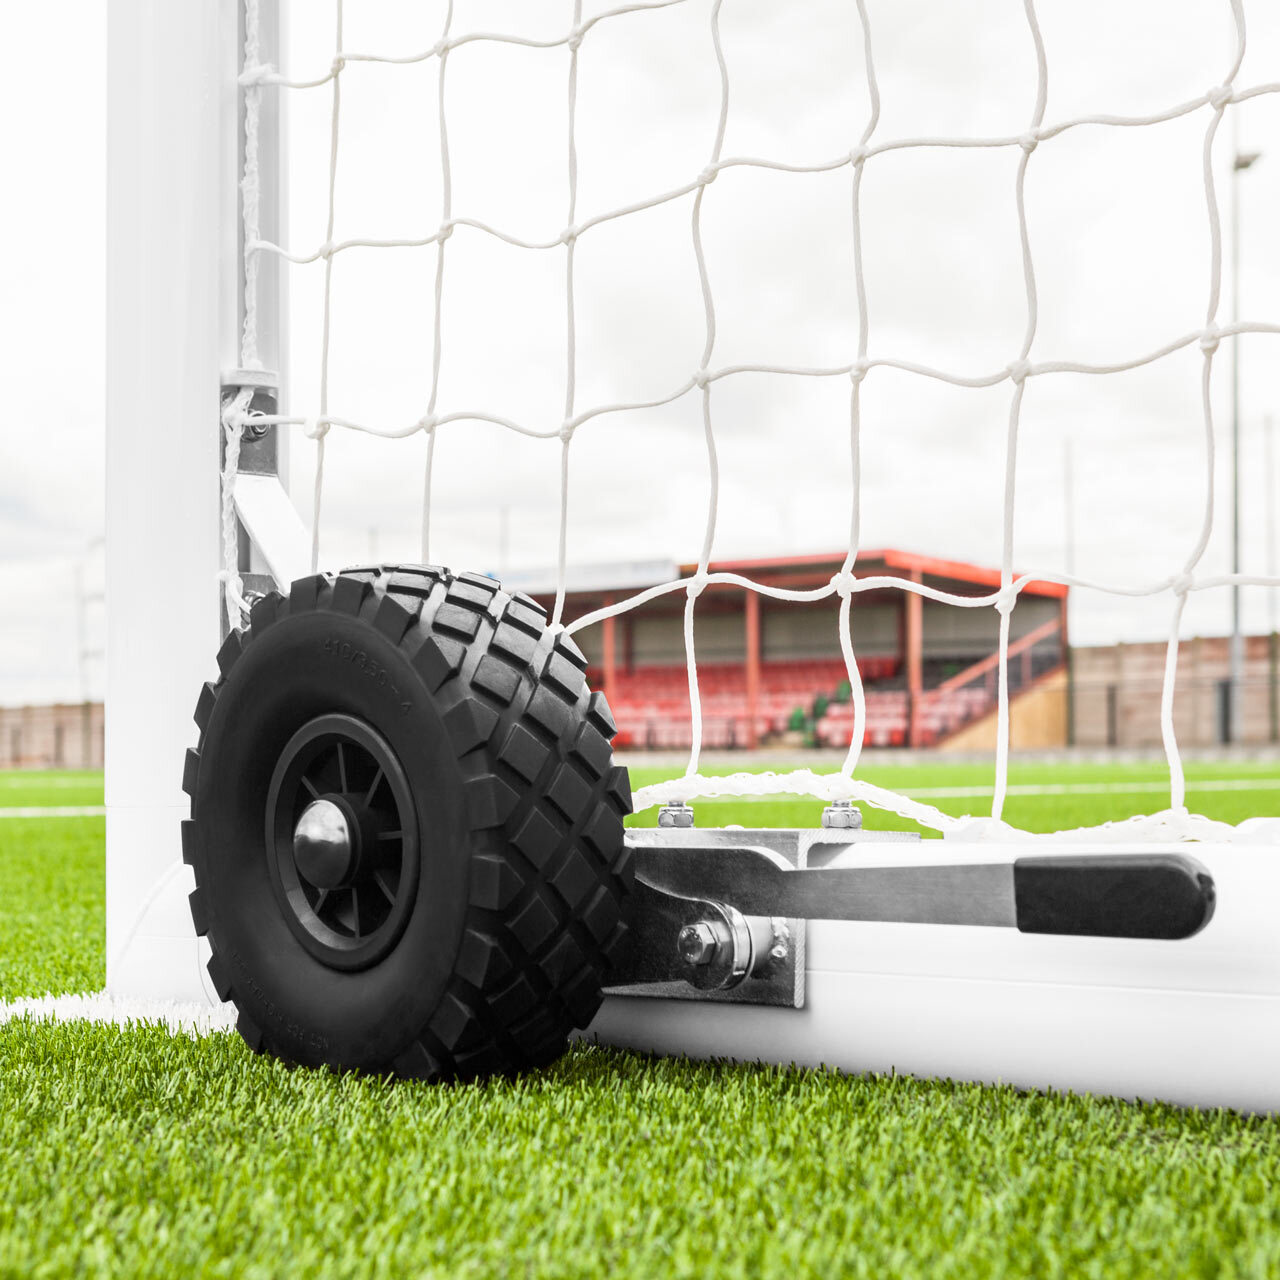 7.3M X 2.4M FORZA ALU110 FREESTANDING SOCCER GOAL [Single or Pair:: Single] [Wheel Options:: 360° Wheels] [Goal Weights:: With Weights]